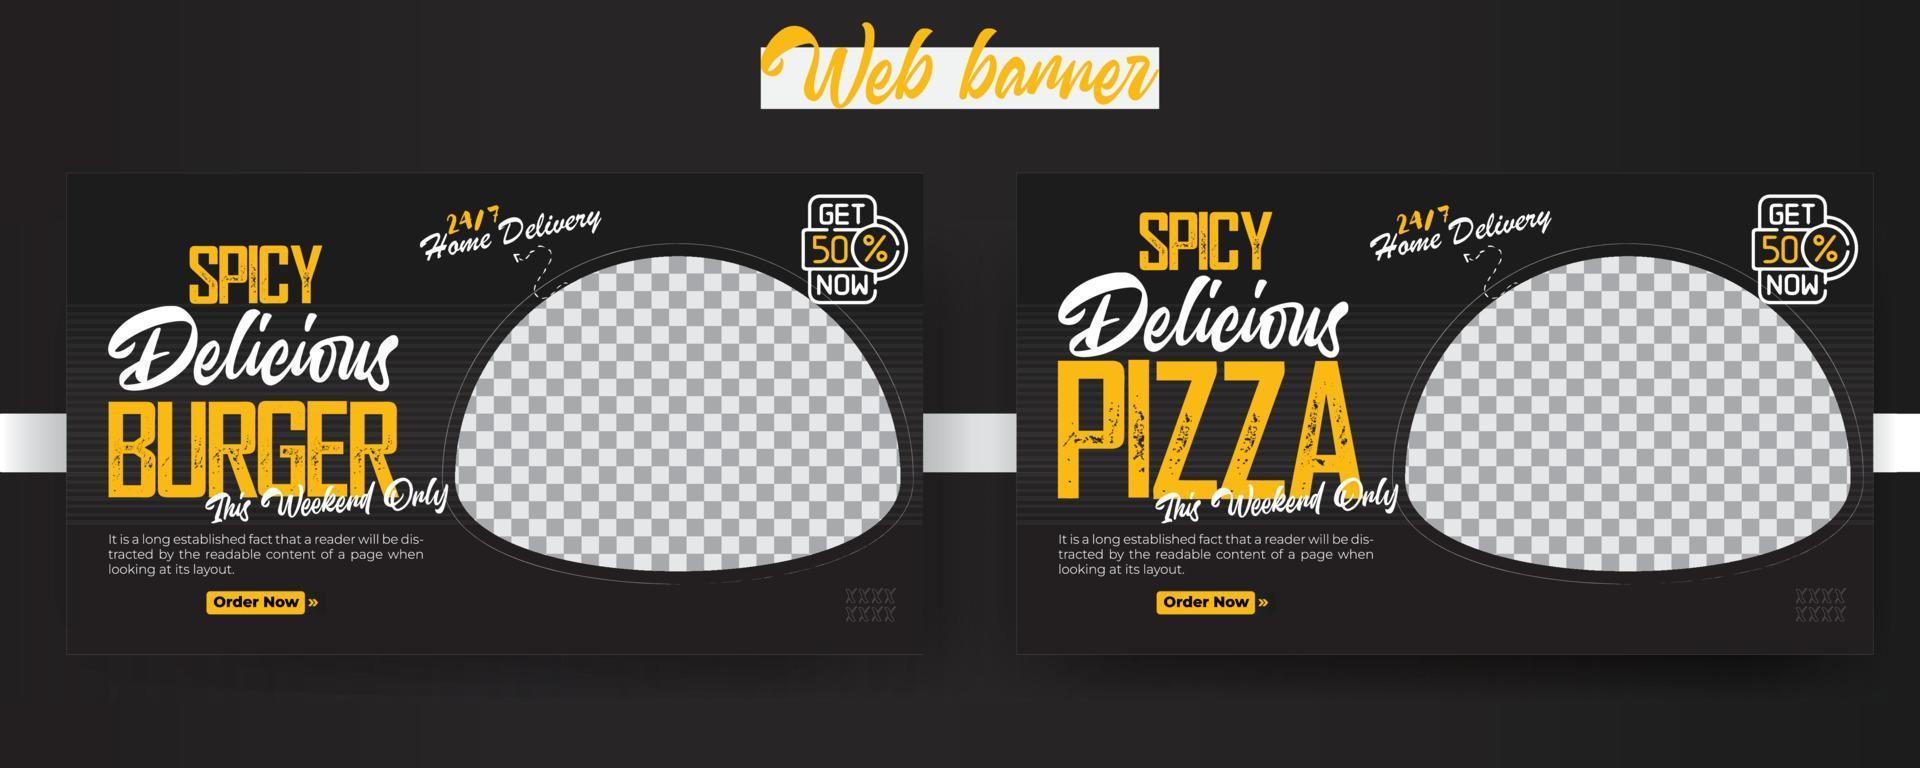 Spicy Delicious Burger And Pizza food web banner template for marketing, Restaurant food menu social media marketing web banner. Pizza, burger or hamburger online sale promotion video thumbnail. Ads. vector